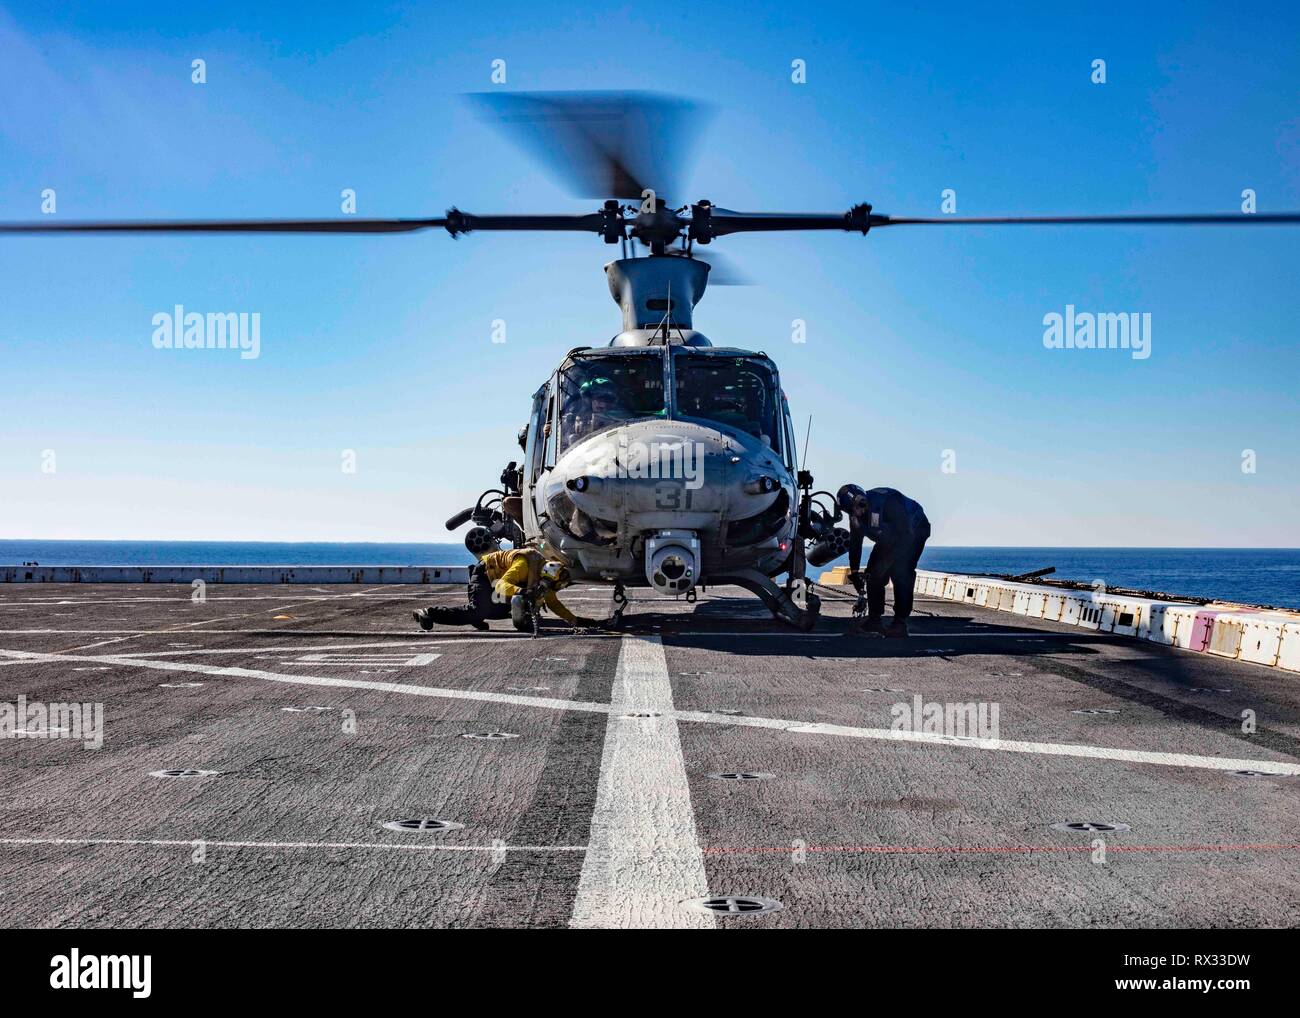 190305-N-HG389-0049 MEDITERRANEAN SEA (Mar. 5, 2019) Sailors secure a UH-1Y Huey helicopter assigned to the “Black Knights” of Marine Medium Tiltrotor Squadron (VMM) 264 (Reinforced) to the flight deck of the San Antonio-class amphibious transport dock ship USS Arlington (LPD 24), Mar. 5, 2019. Arlington is on a scheduled deployment as part of the Kearsarge Amphibious Ready Group in support of maritime security operations, crisis response and theater security cooperation, while also providing a forward naval presence. (U.S. Navy photo by Mass Communication Specialist 2nd Class Brandon Parker/R Stock Photo